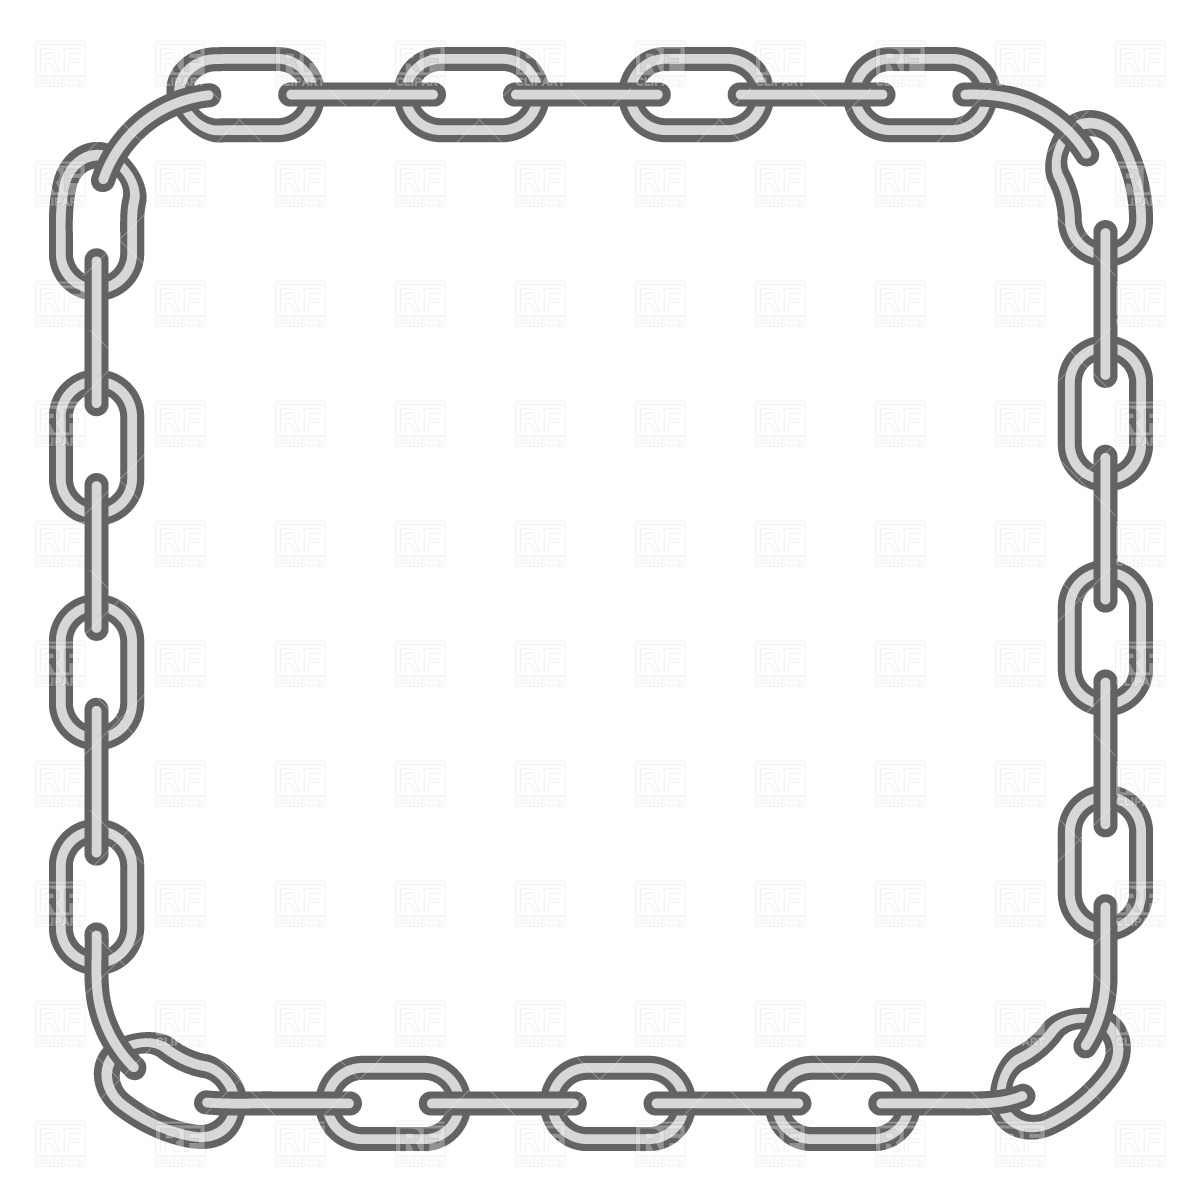 Frame 723 Borders And Frames Download Royalty Free Vector Clip Art